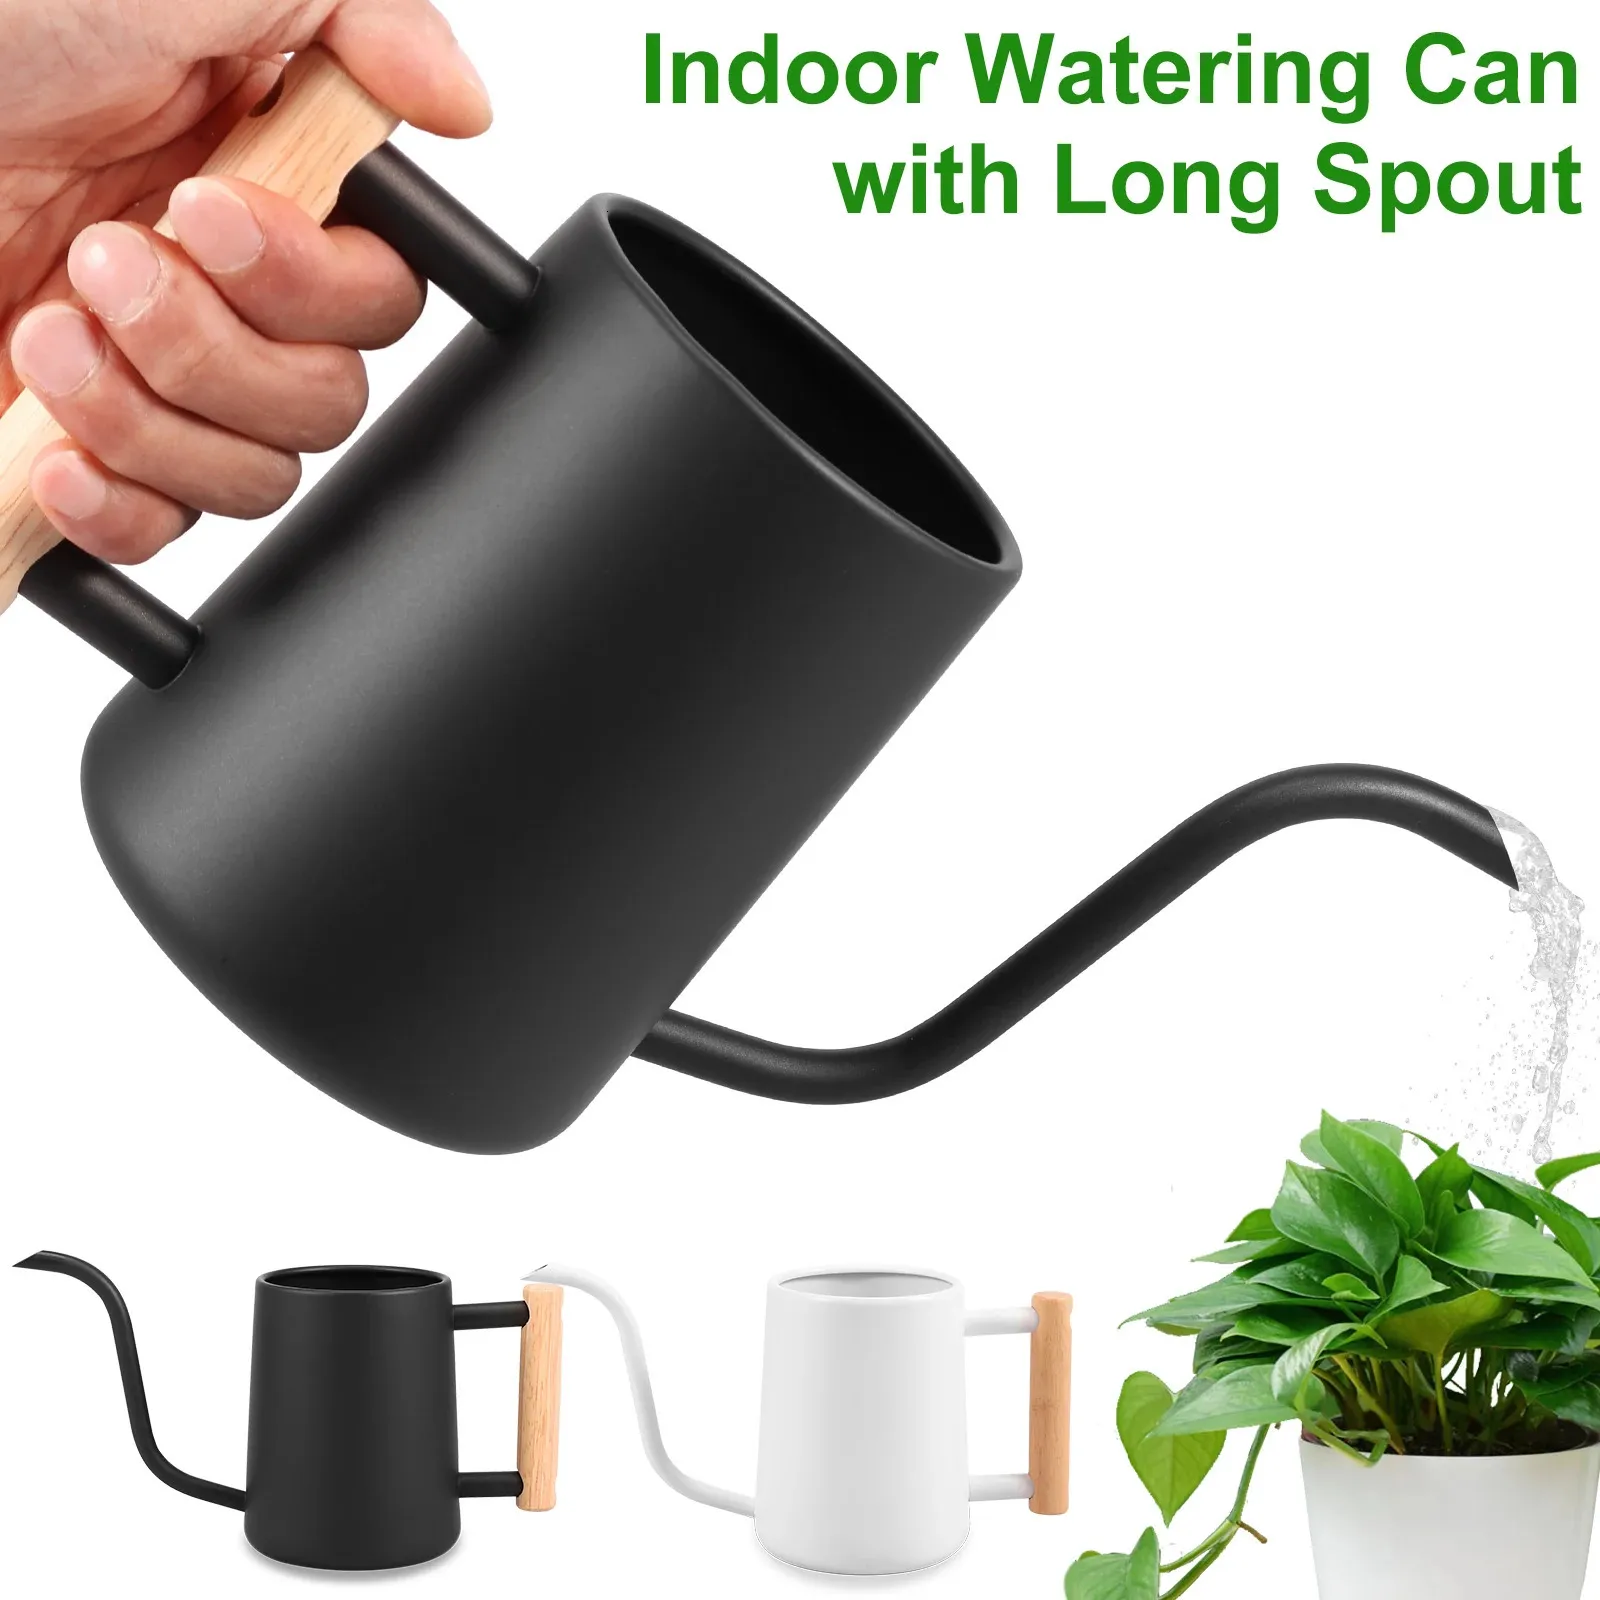 1L Watering Can Small Watering Can Indoor Plants w/ Wooden Handle Stainless Steel Watering Pot w/ Long Spout Garden Watering Can 240409